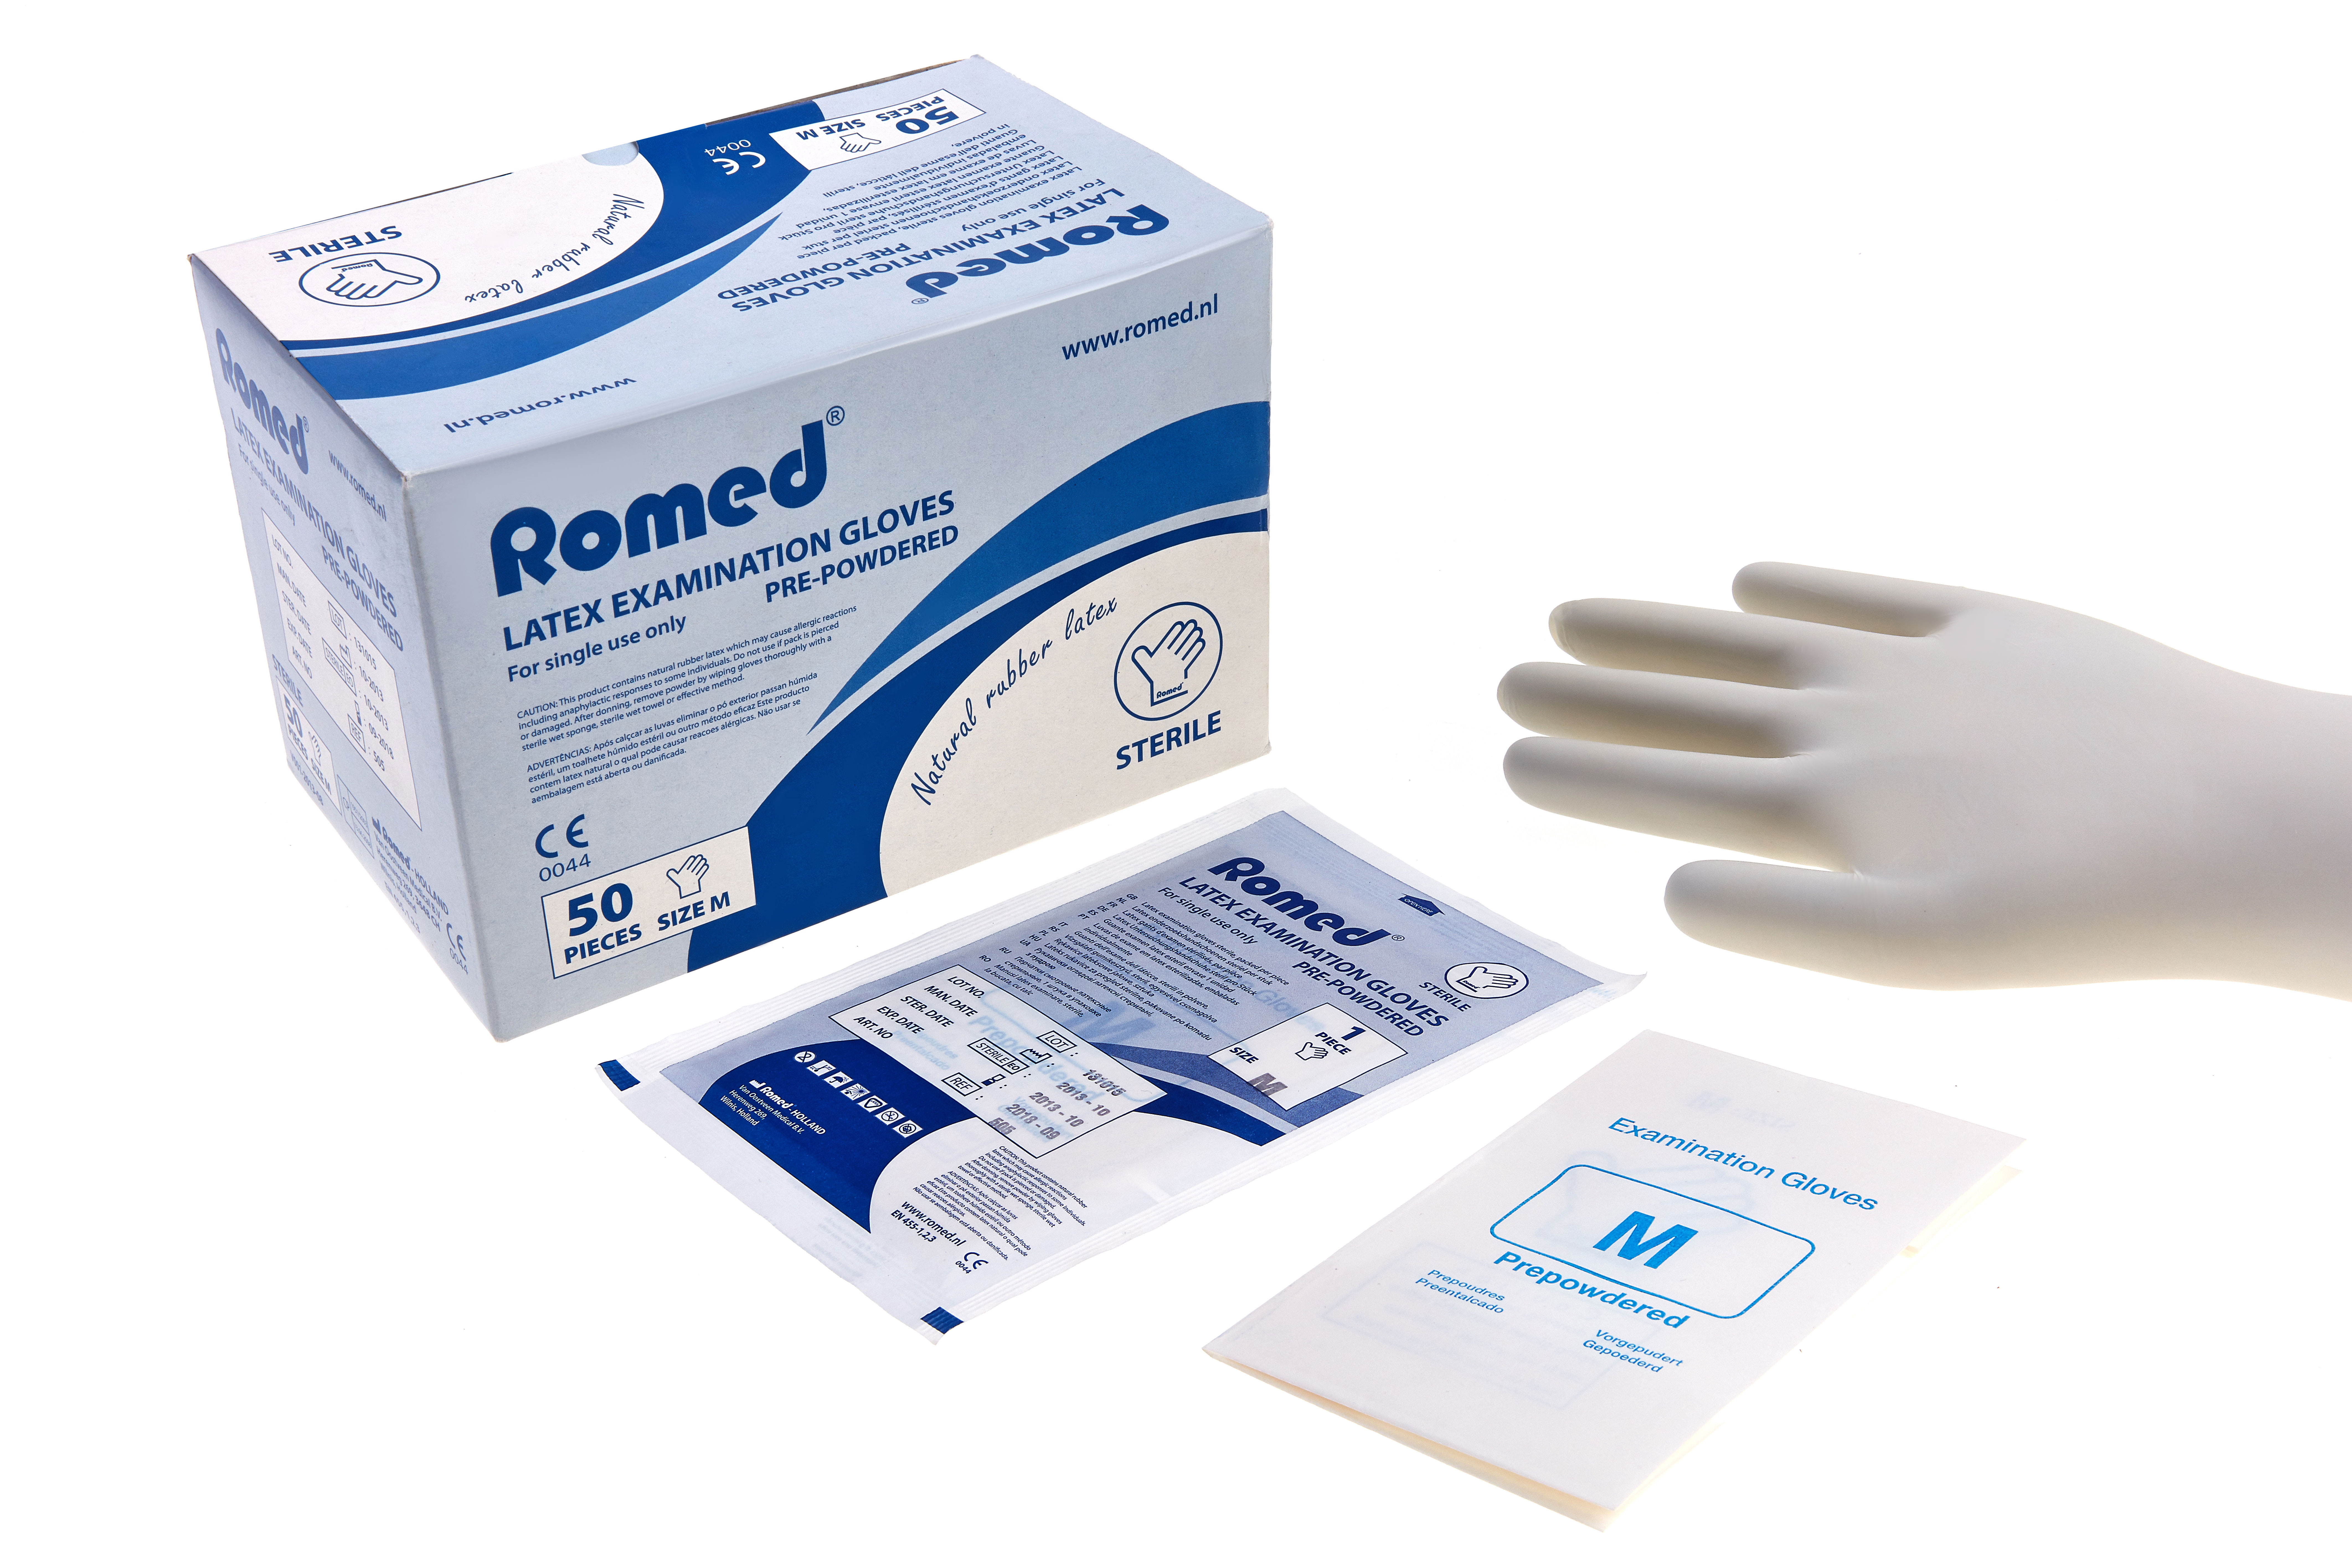 510 Romed latex examination gloves, sterile per piece, large, prepowdered, per 50 pcs in an inner box, 6 x 50 pcs = 300 pcs in a carton